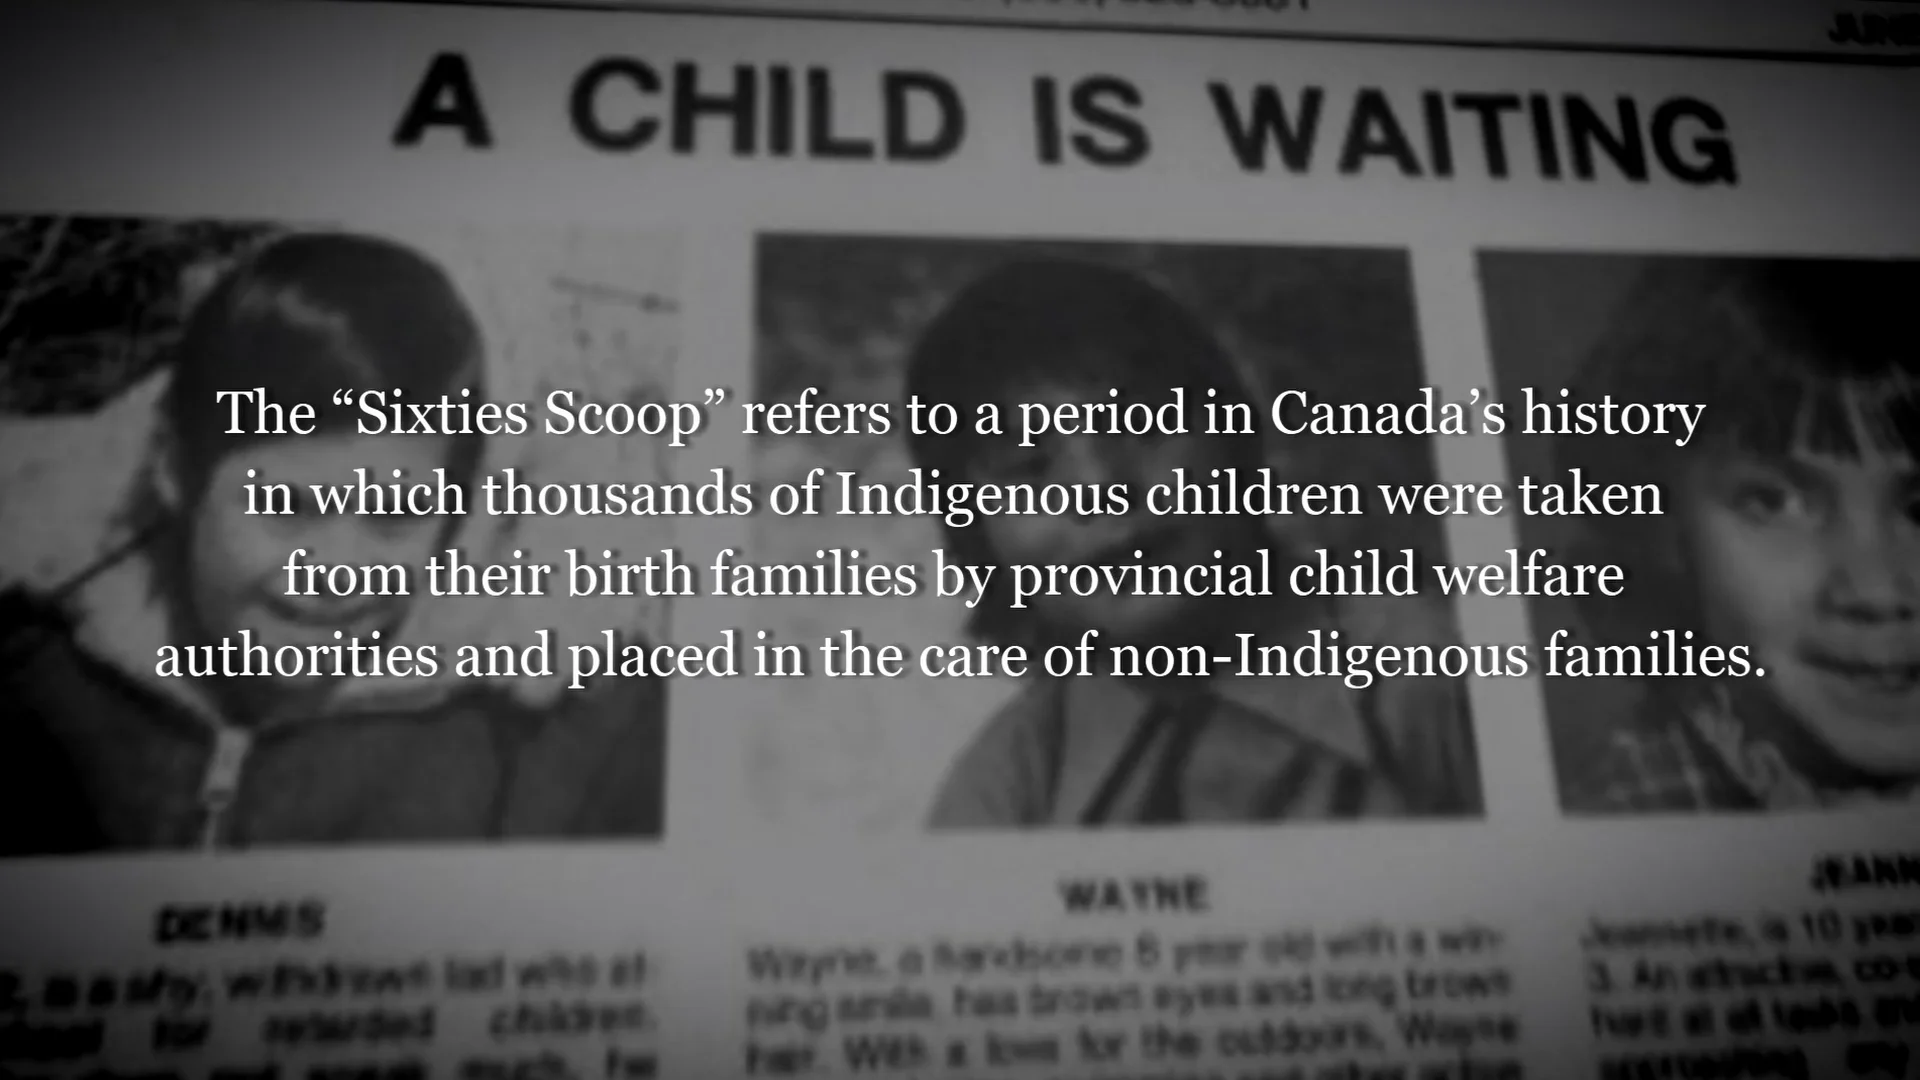 What is the Sixties Scoop?